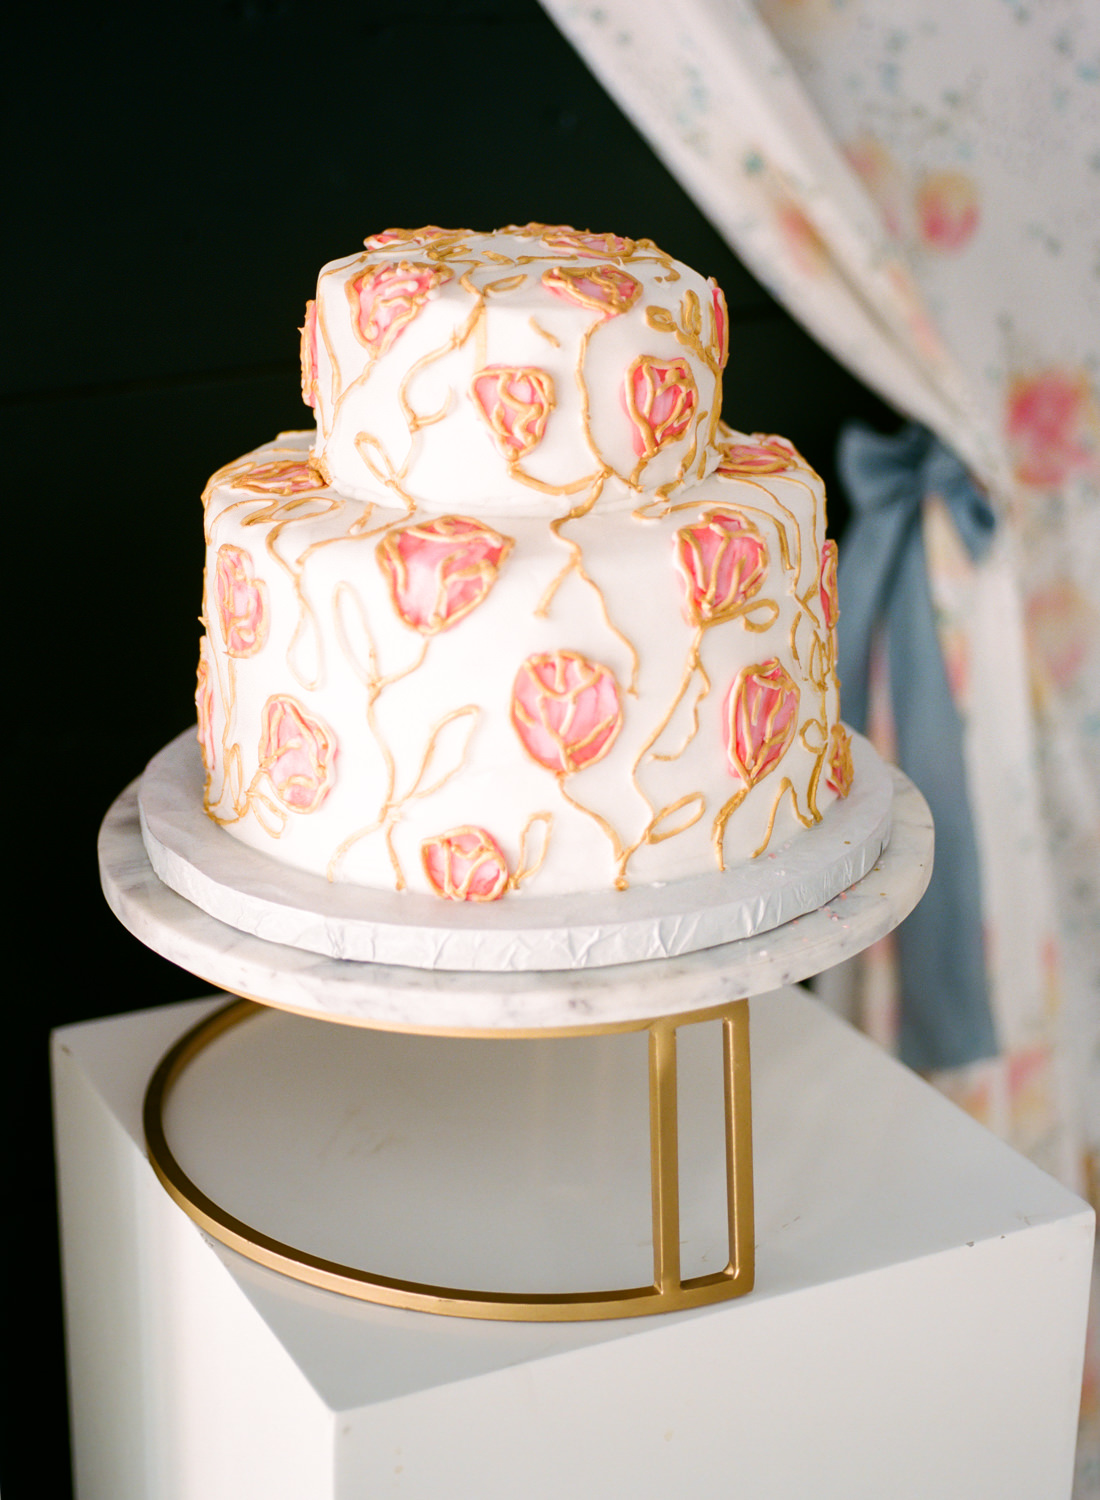 White and coral flower design wedding cake by Underbrinks Bakery, St. Louis wedding photographer